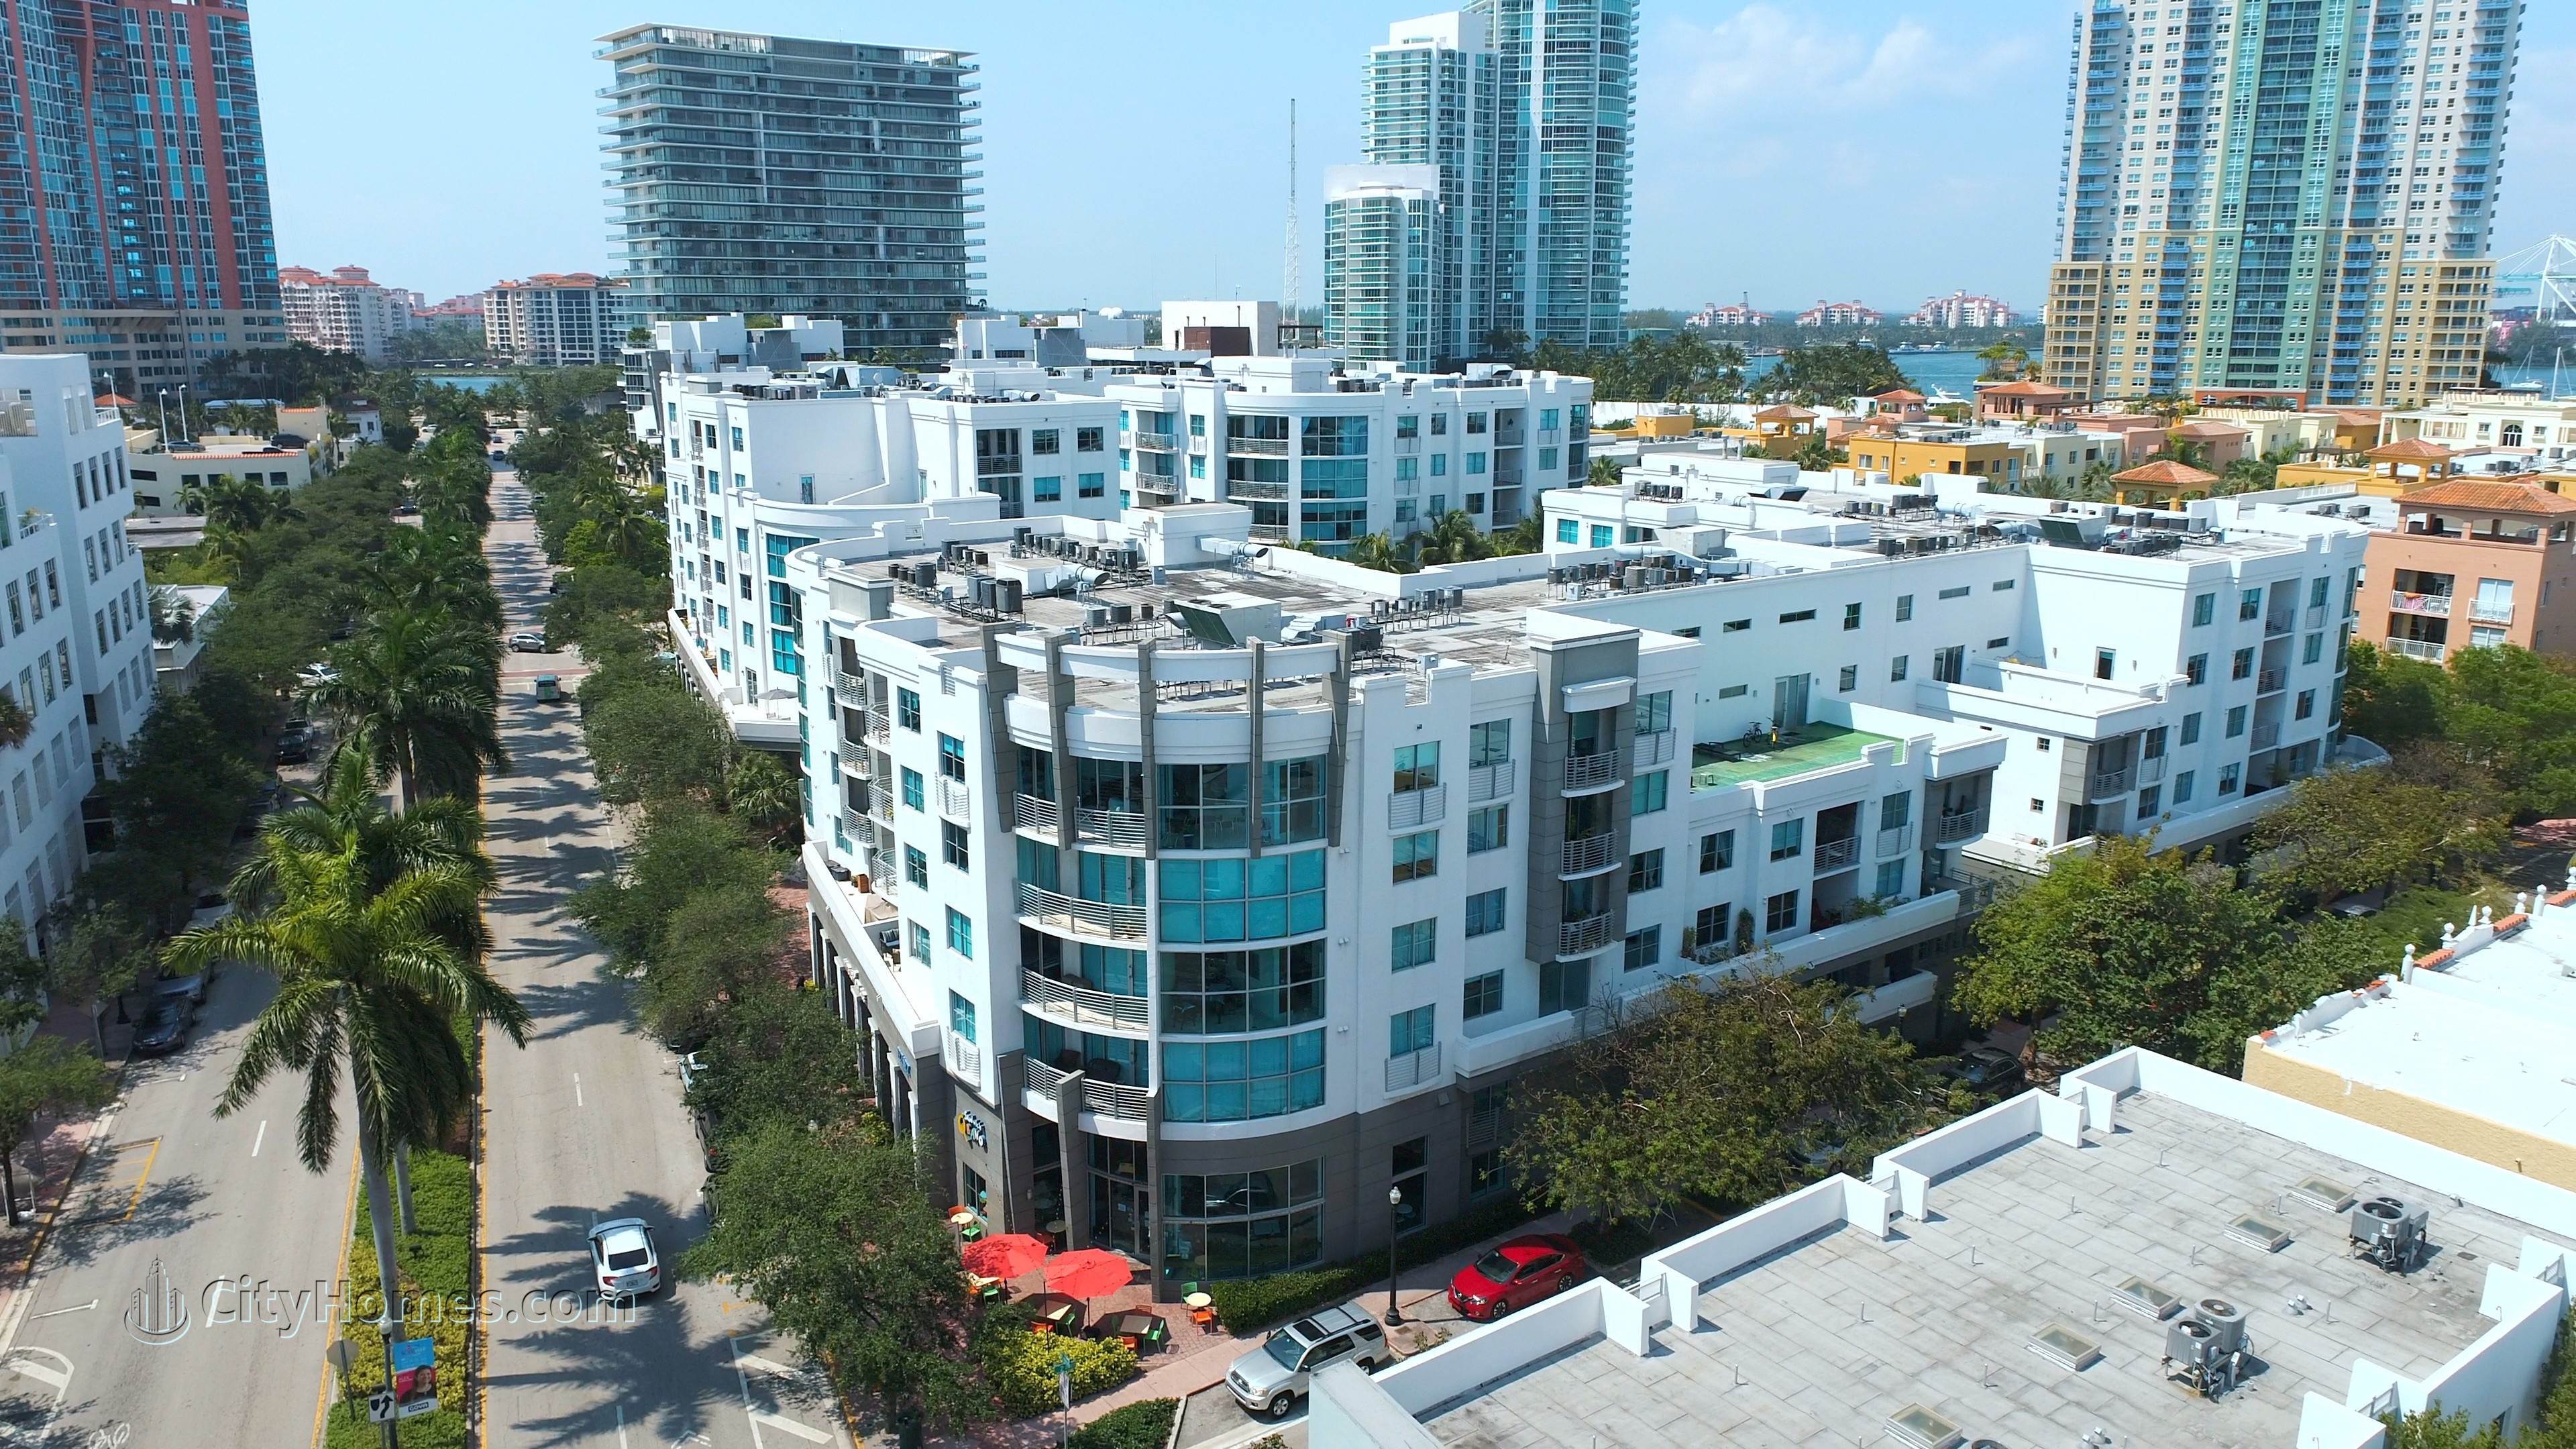 2. COSMOPOLITAN TOWERS building at 110 Washington Ave, South of Fifth, Miami Beach, FL 33139